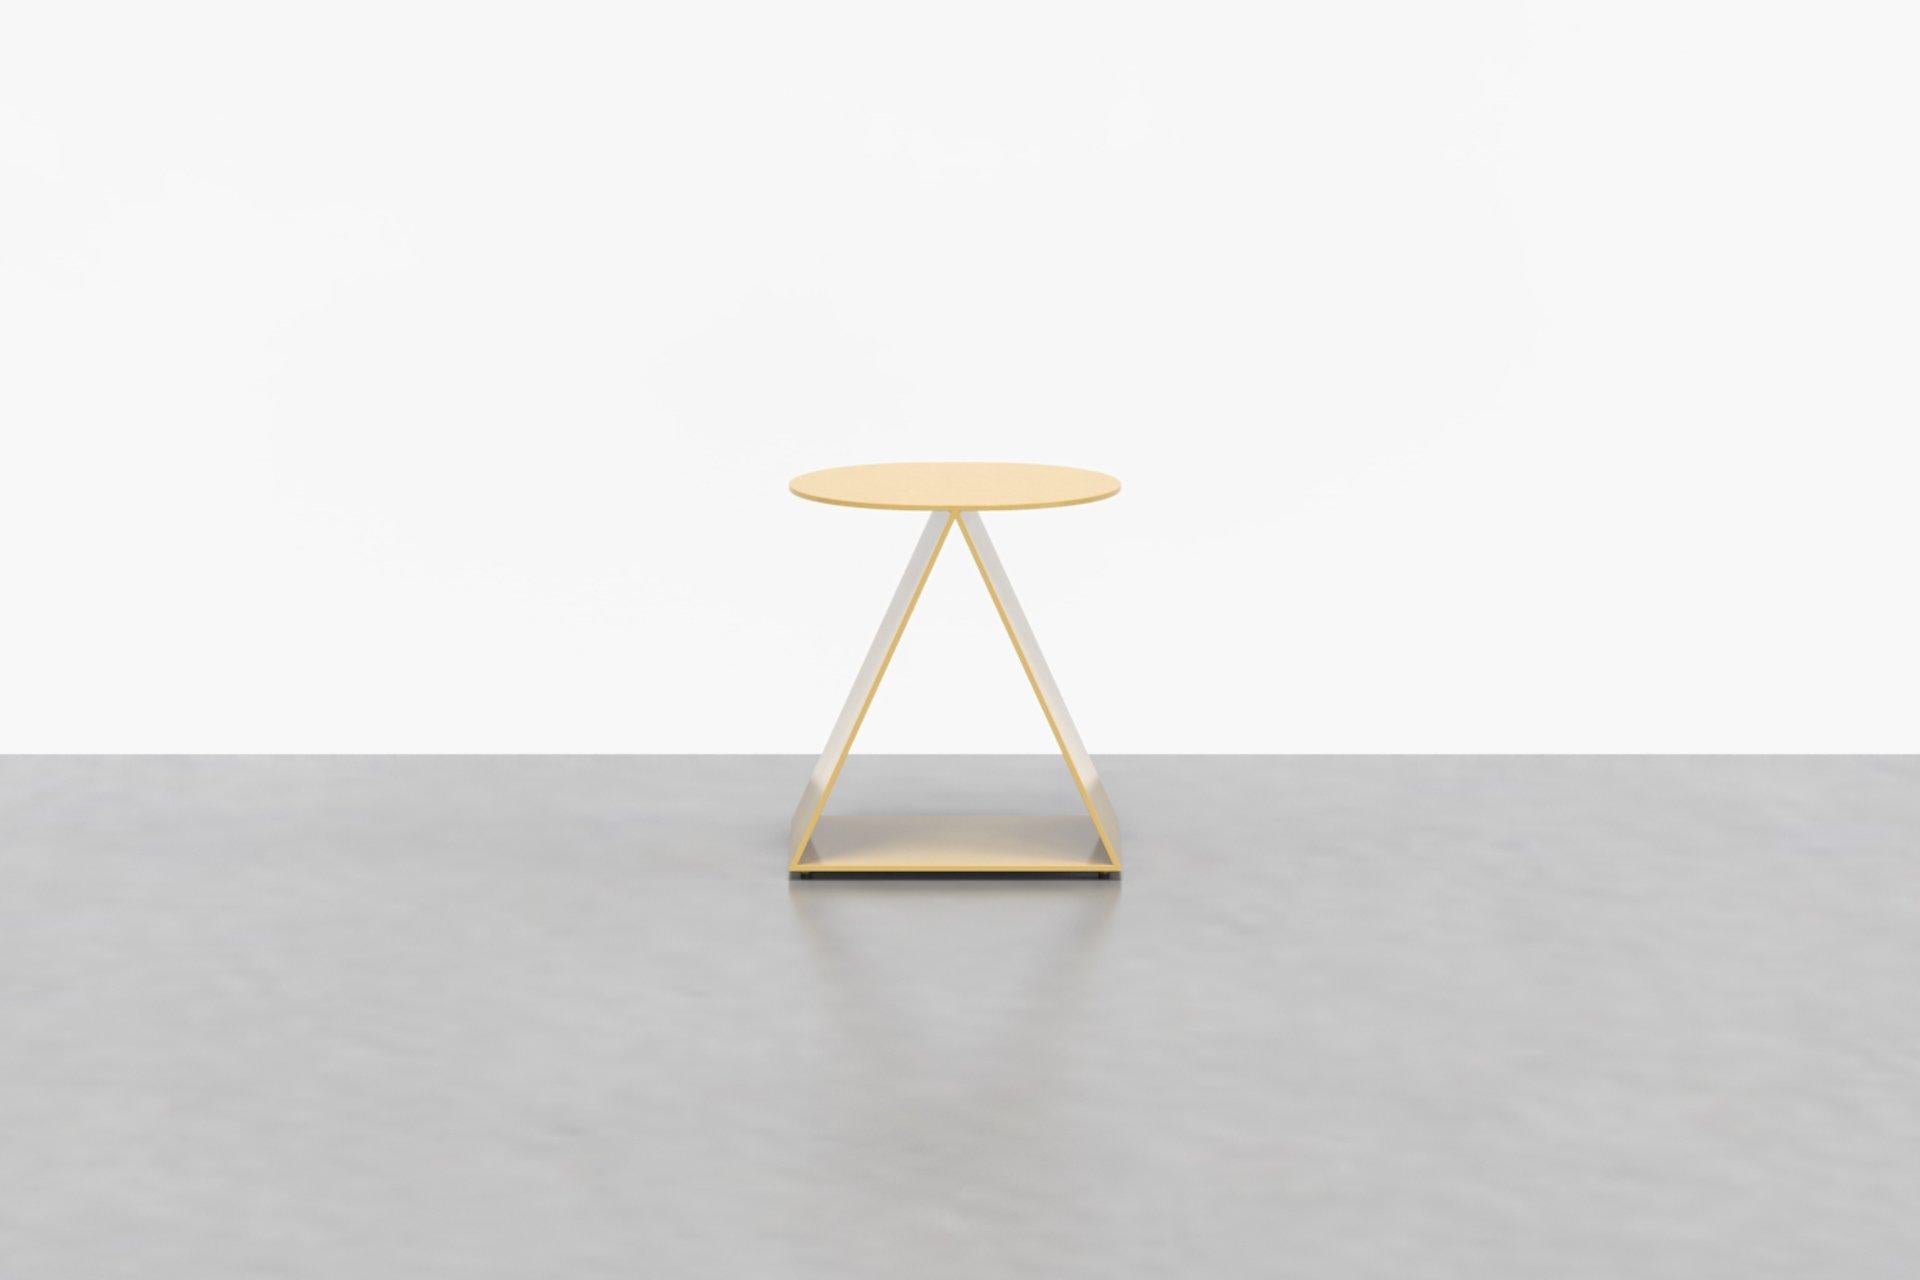 The Tack stool is more than it seems, use it as an end table, side table, pedestal, or as a sculptural feature for that new plant you brought home. The Tack stool is made from powder-coated aluminum in a palette of vibrant tones.

Available in